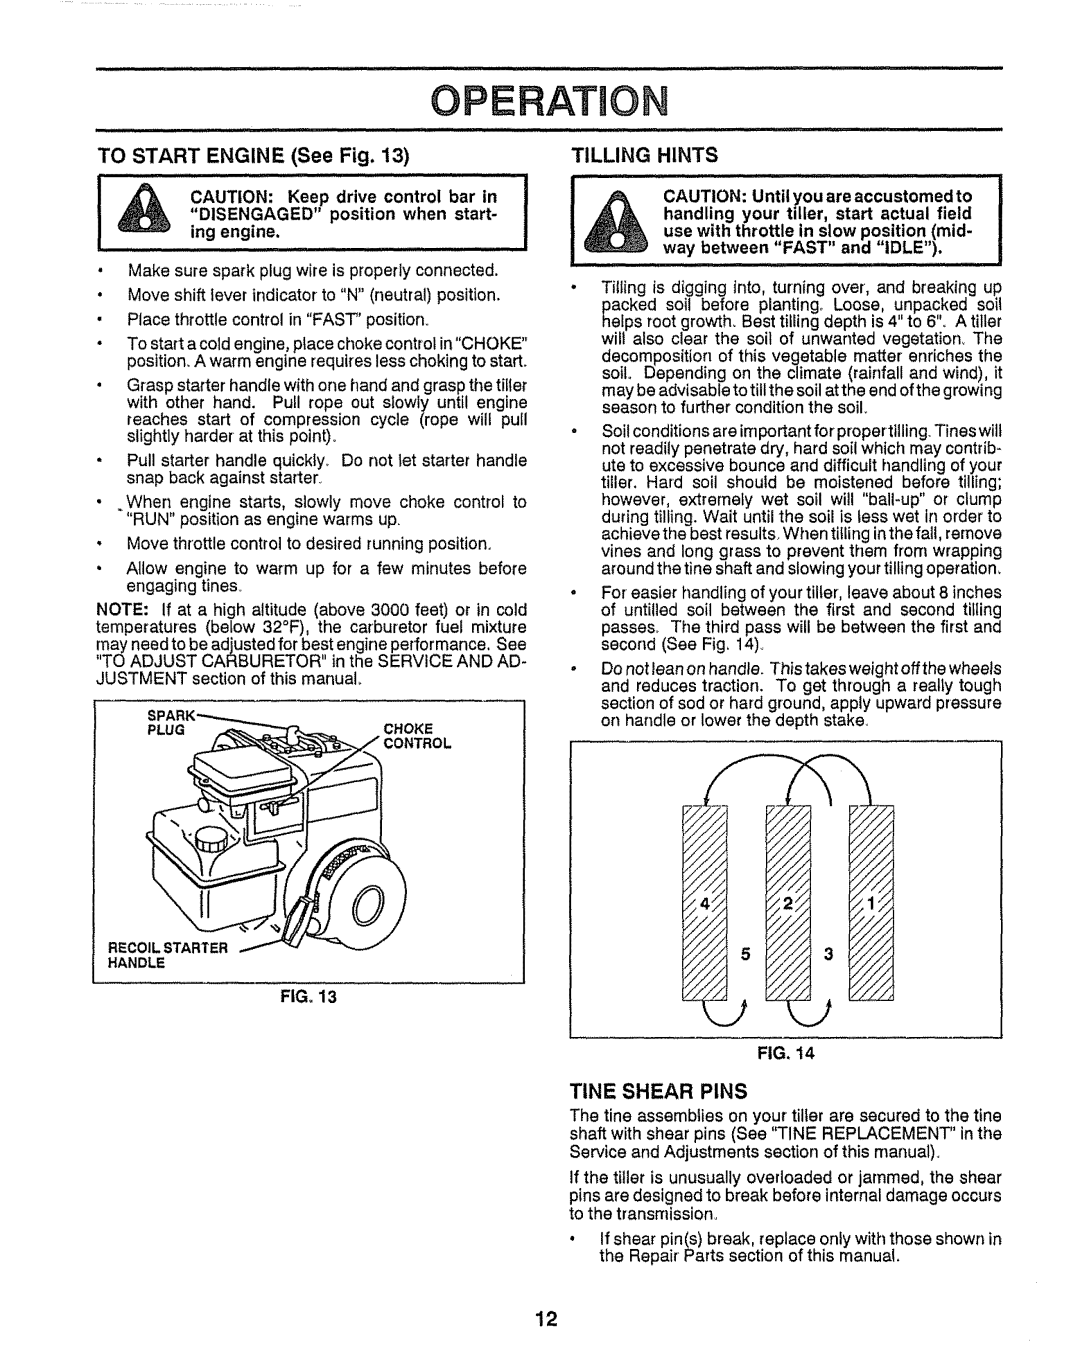 Craftsman 917.29555 manual Operation, Tine Shear Pins, TO START ENGINE See Fig, Tilling Hints 